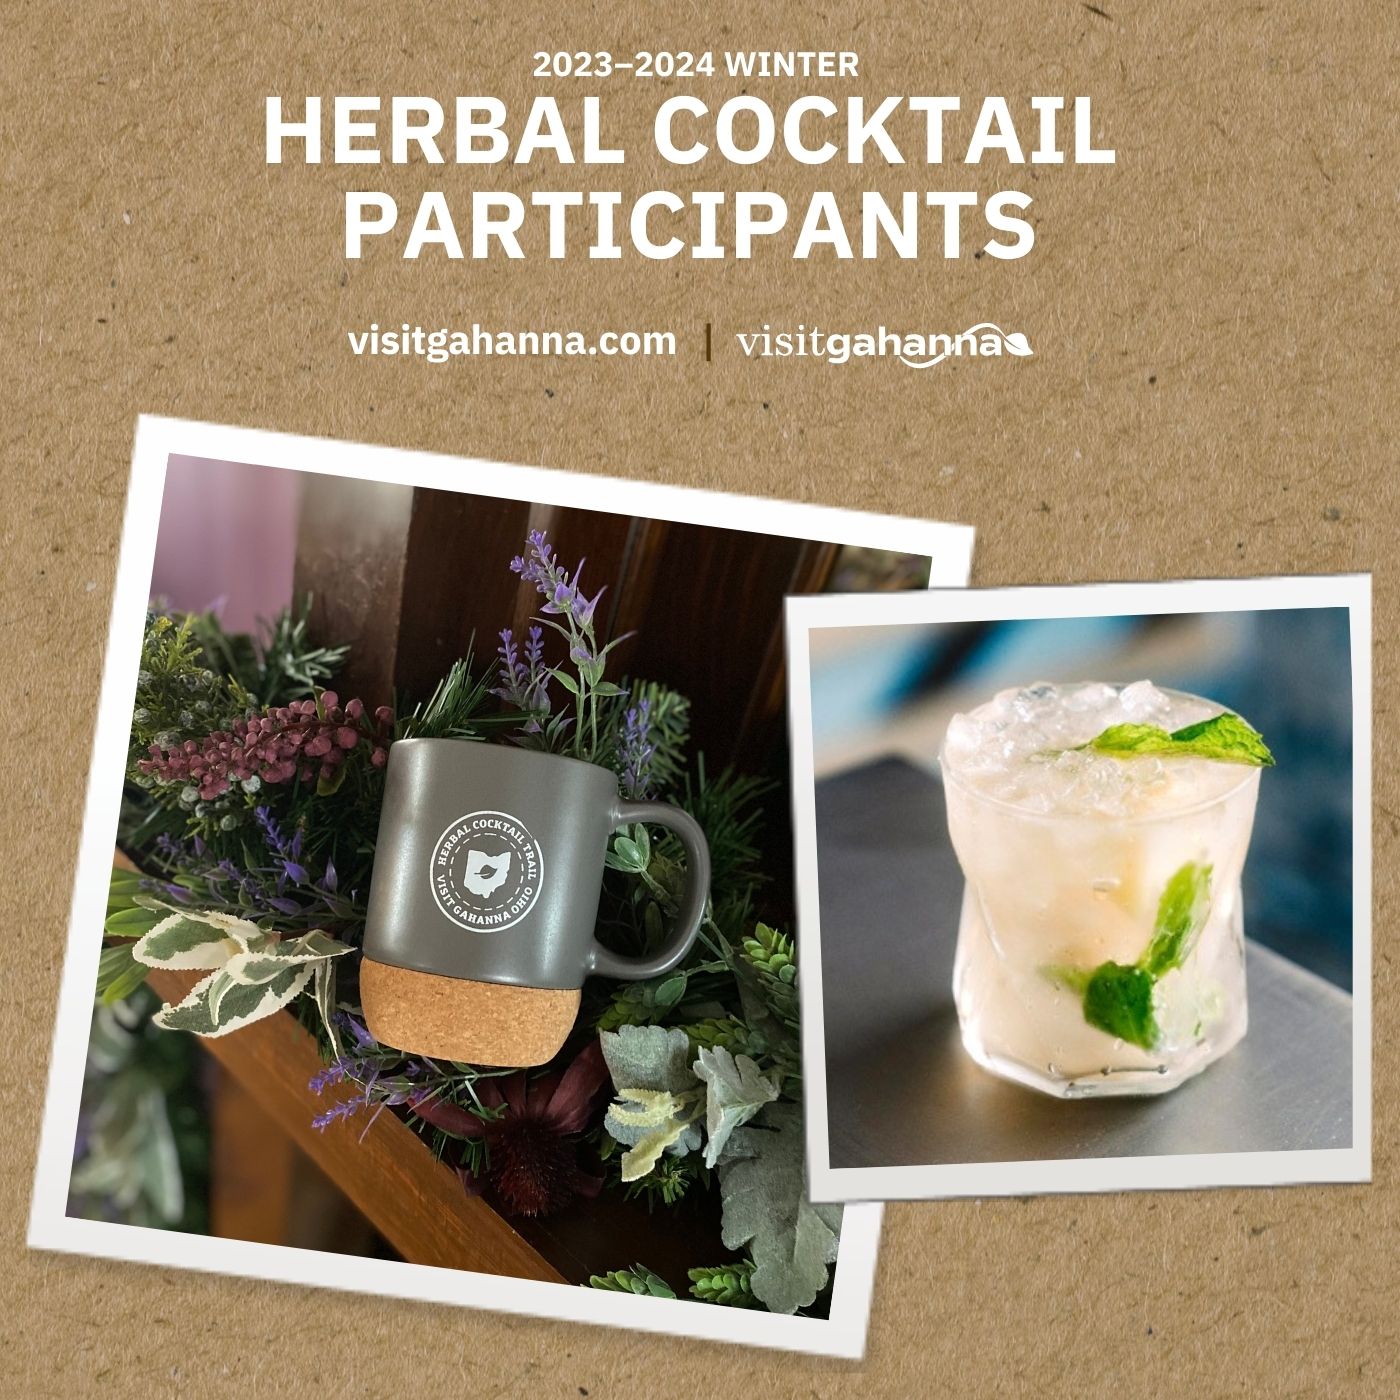 Winter Herbal Cocktail Trail Participants